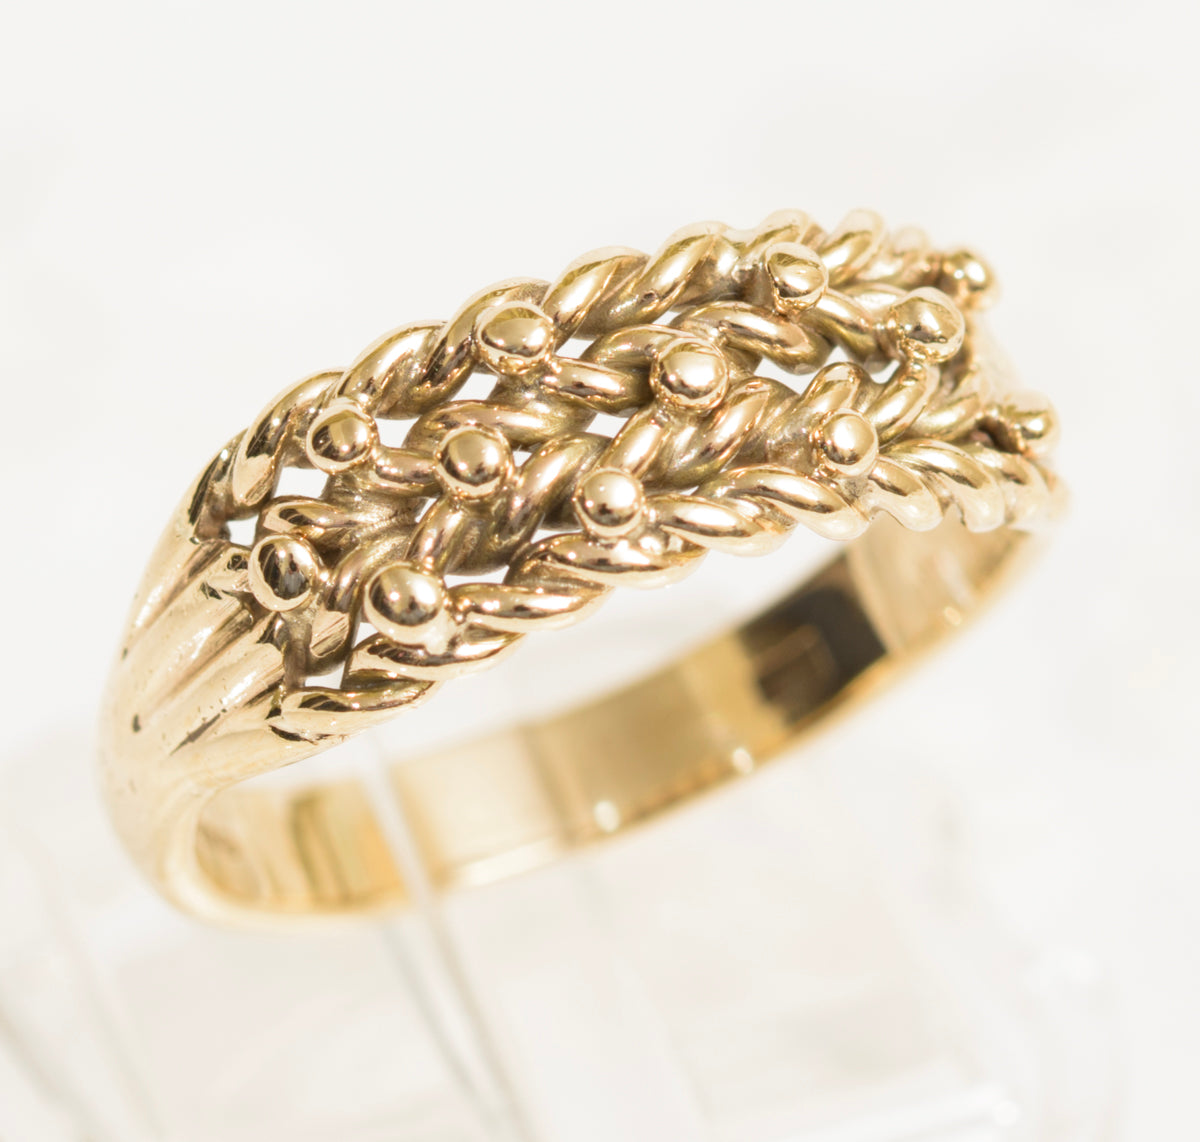 Vintage 9ct Yellow Gold Keeper Ring Unisex Design Size P1/2 (7.75) (A1970)